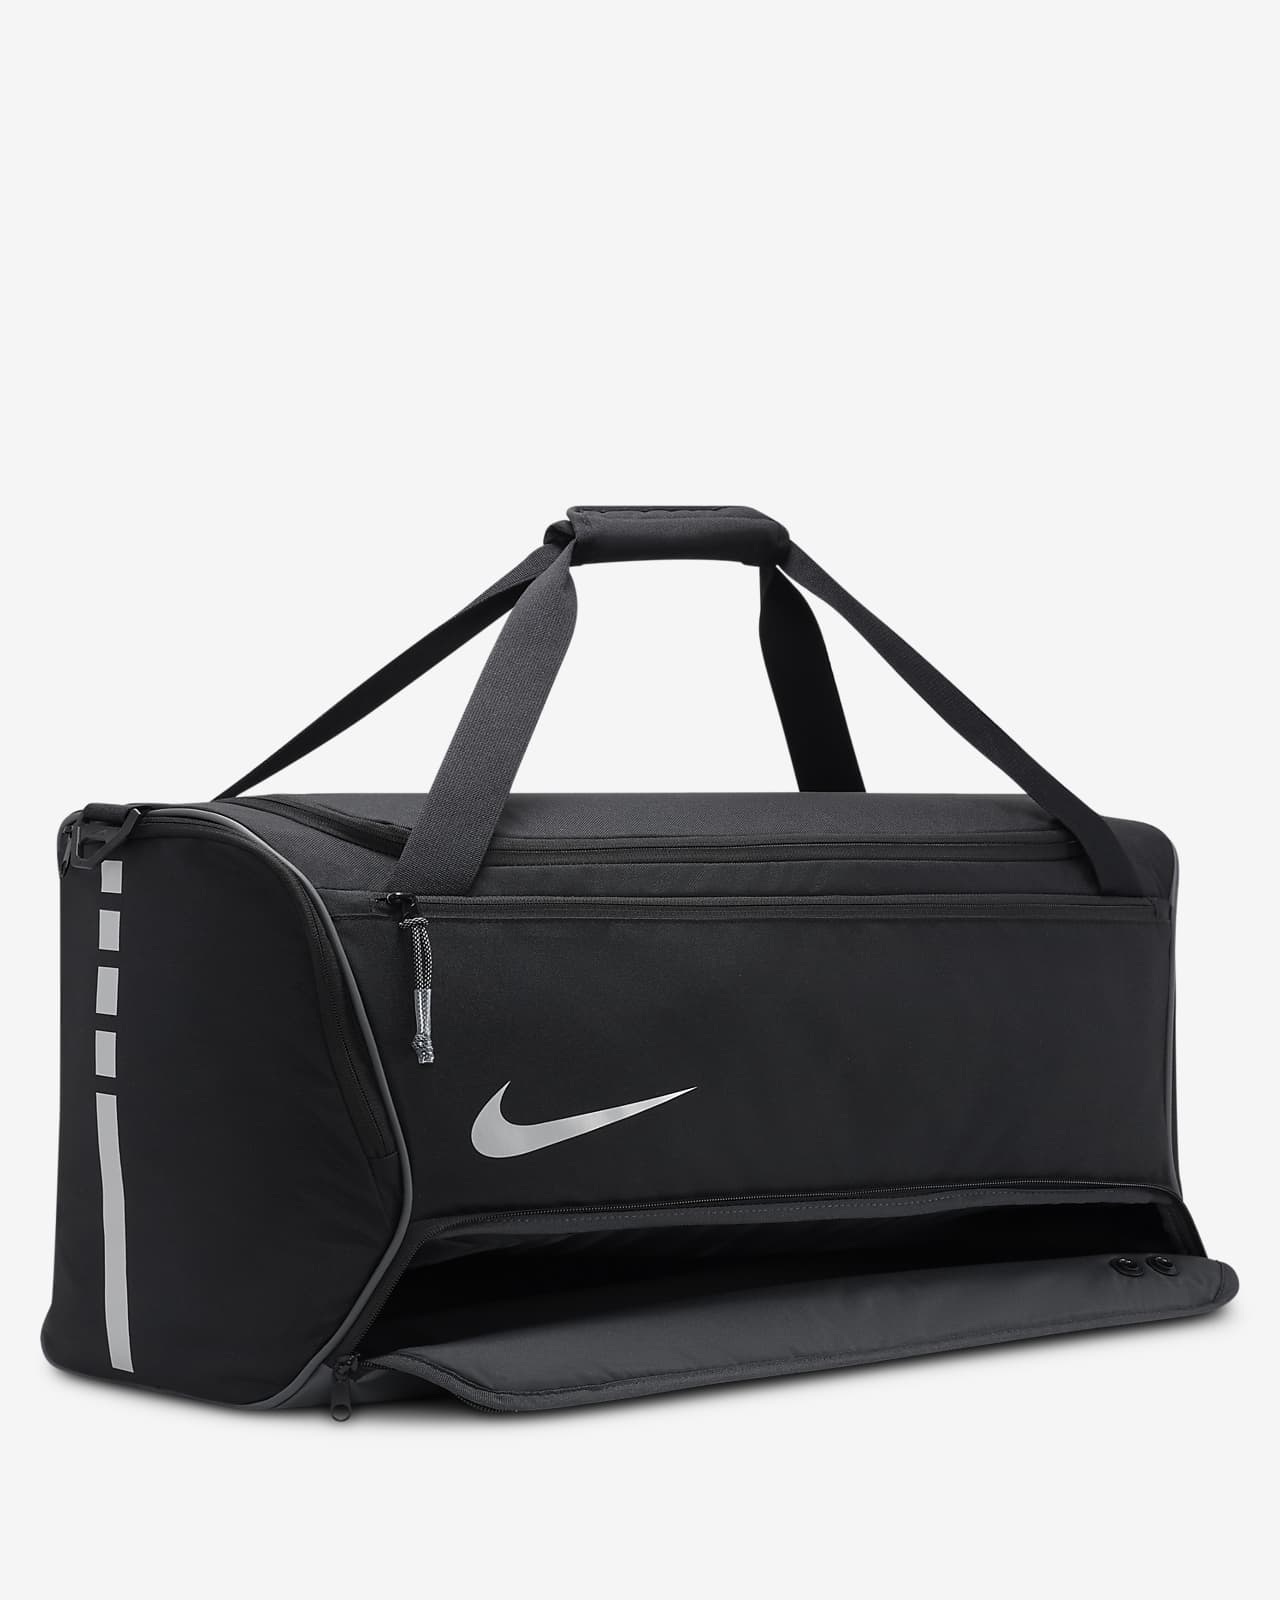 Puma Hoops x Private Label Elite 1 Exclusive Basketball Bag